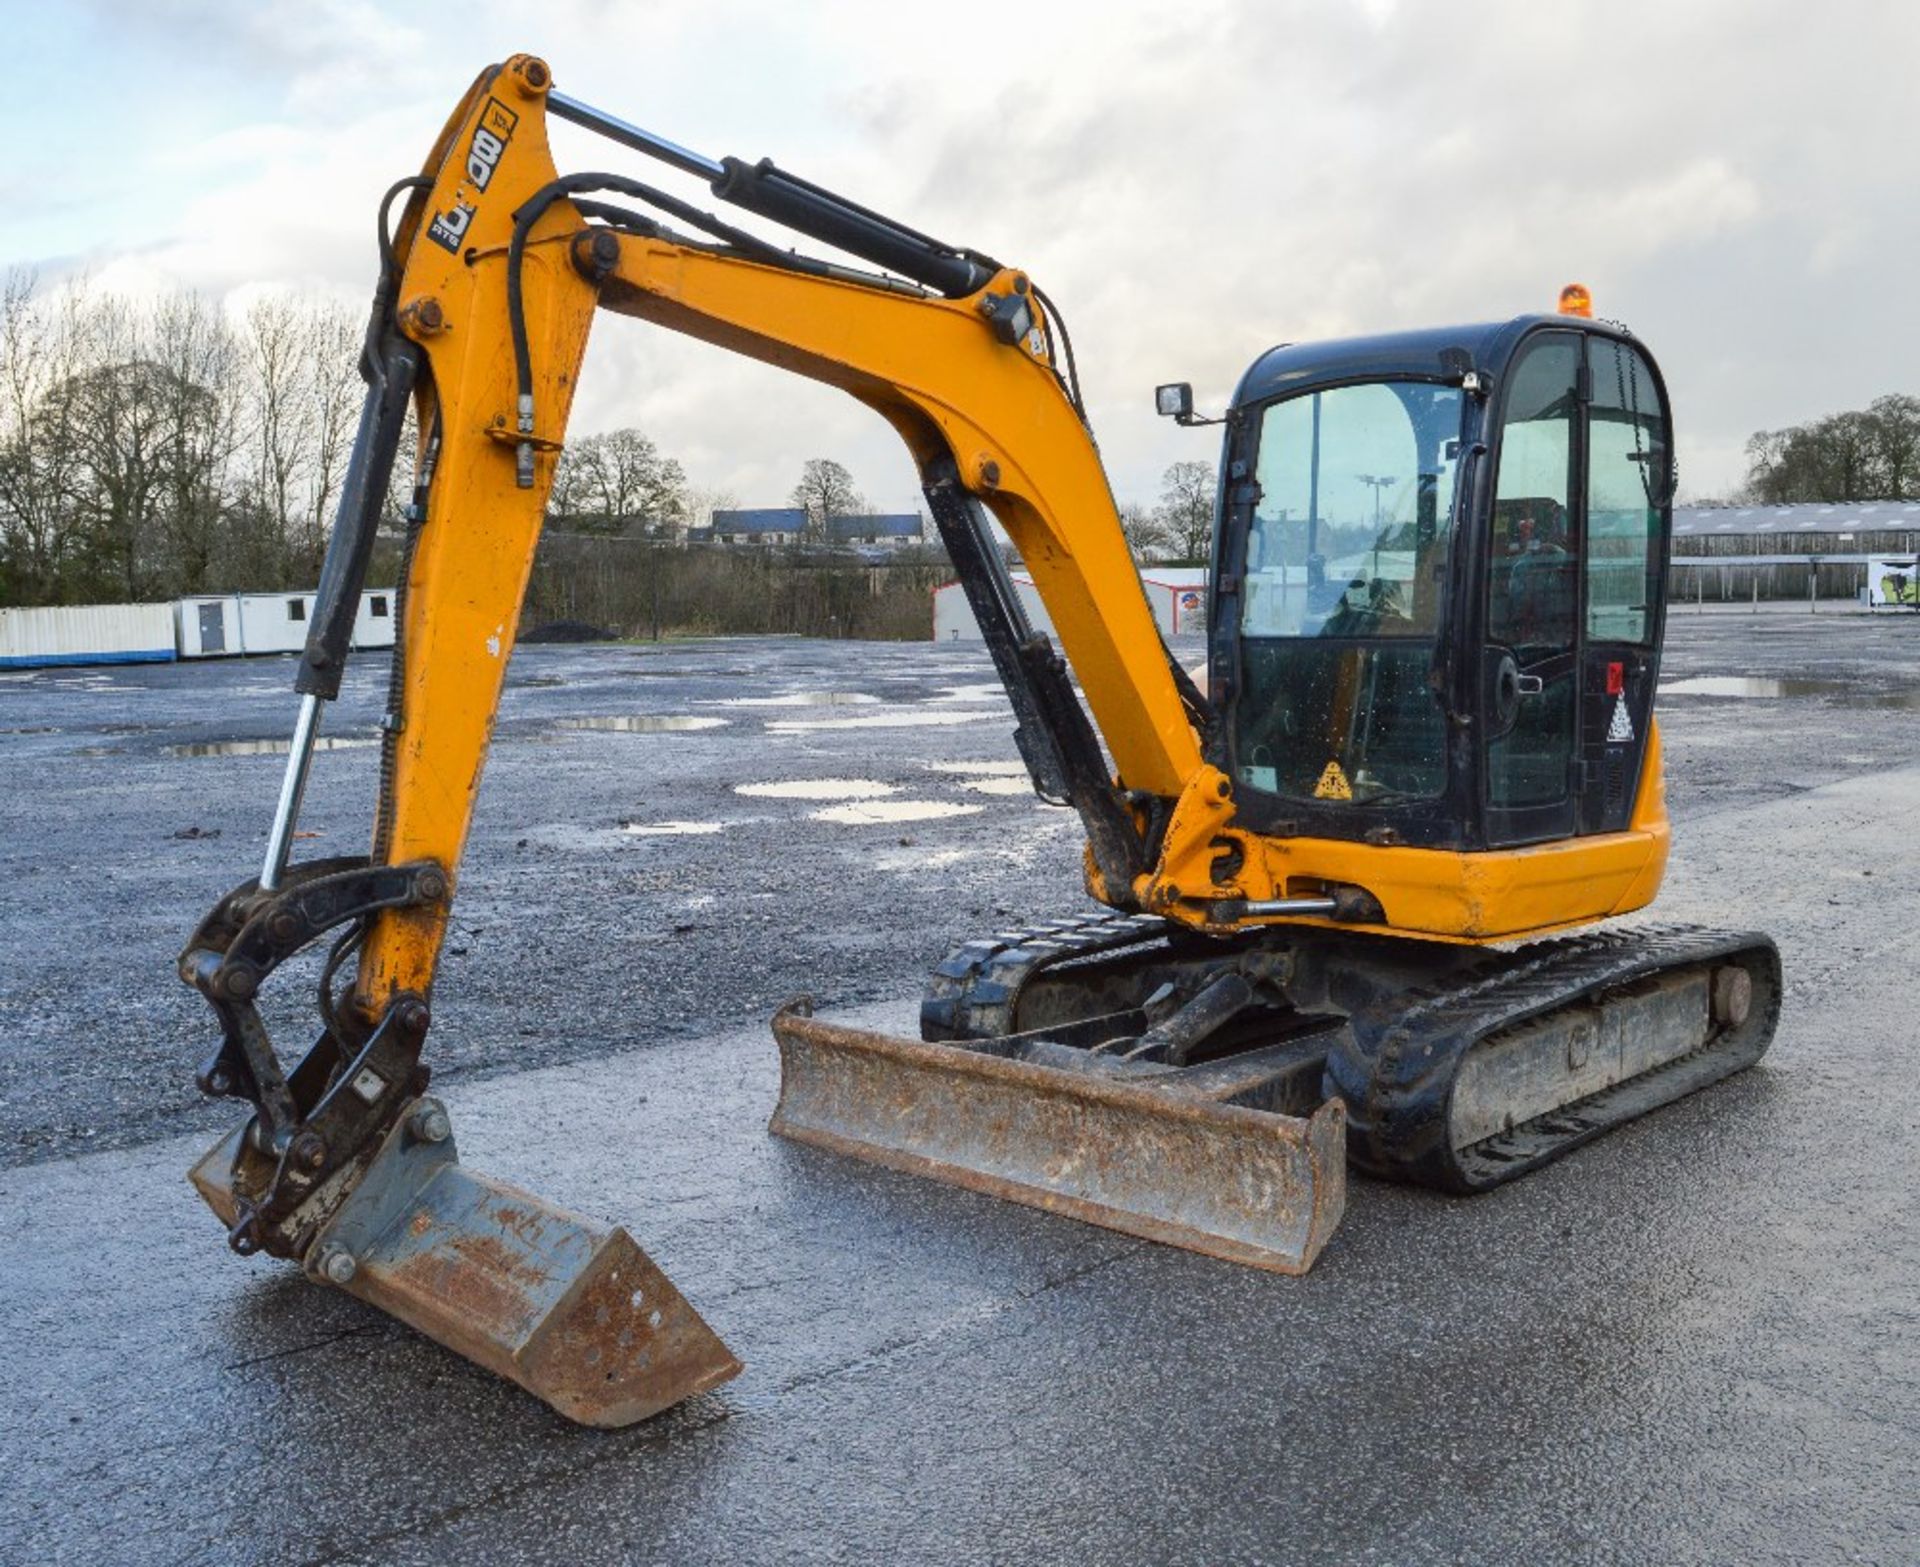 JCB 8050 RTS 5 tonne reduced tail swing rubber tracked mini excavator
Year: 2011
S/N: 1741659